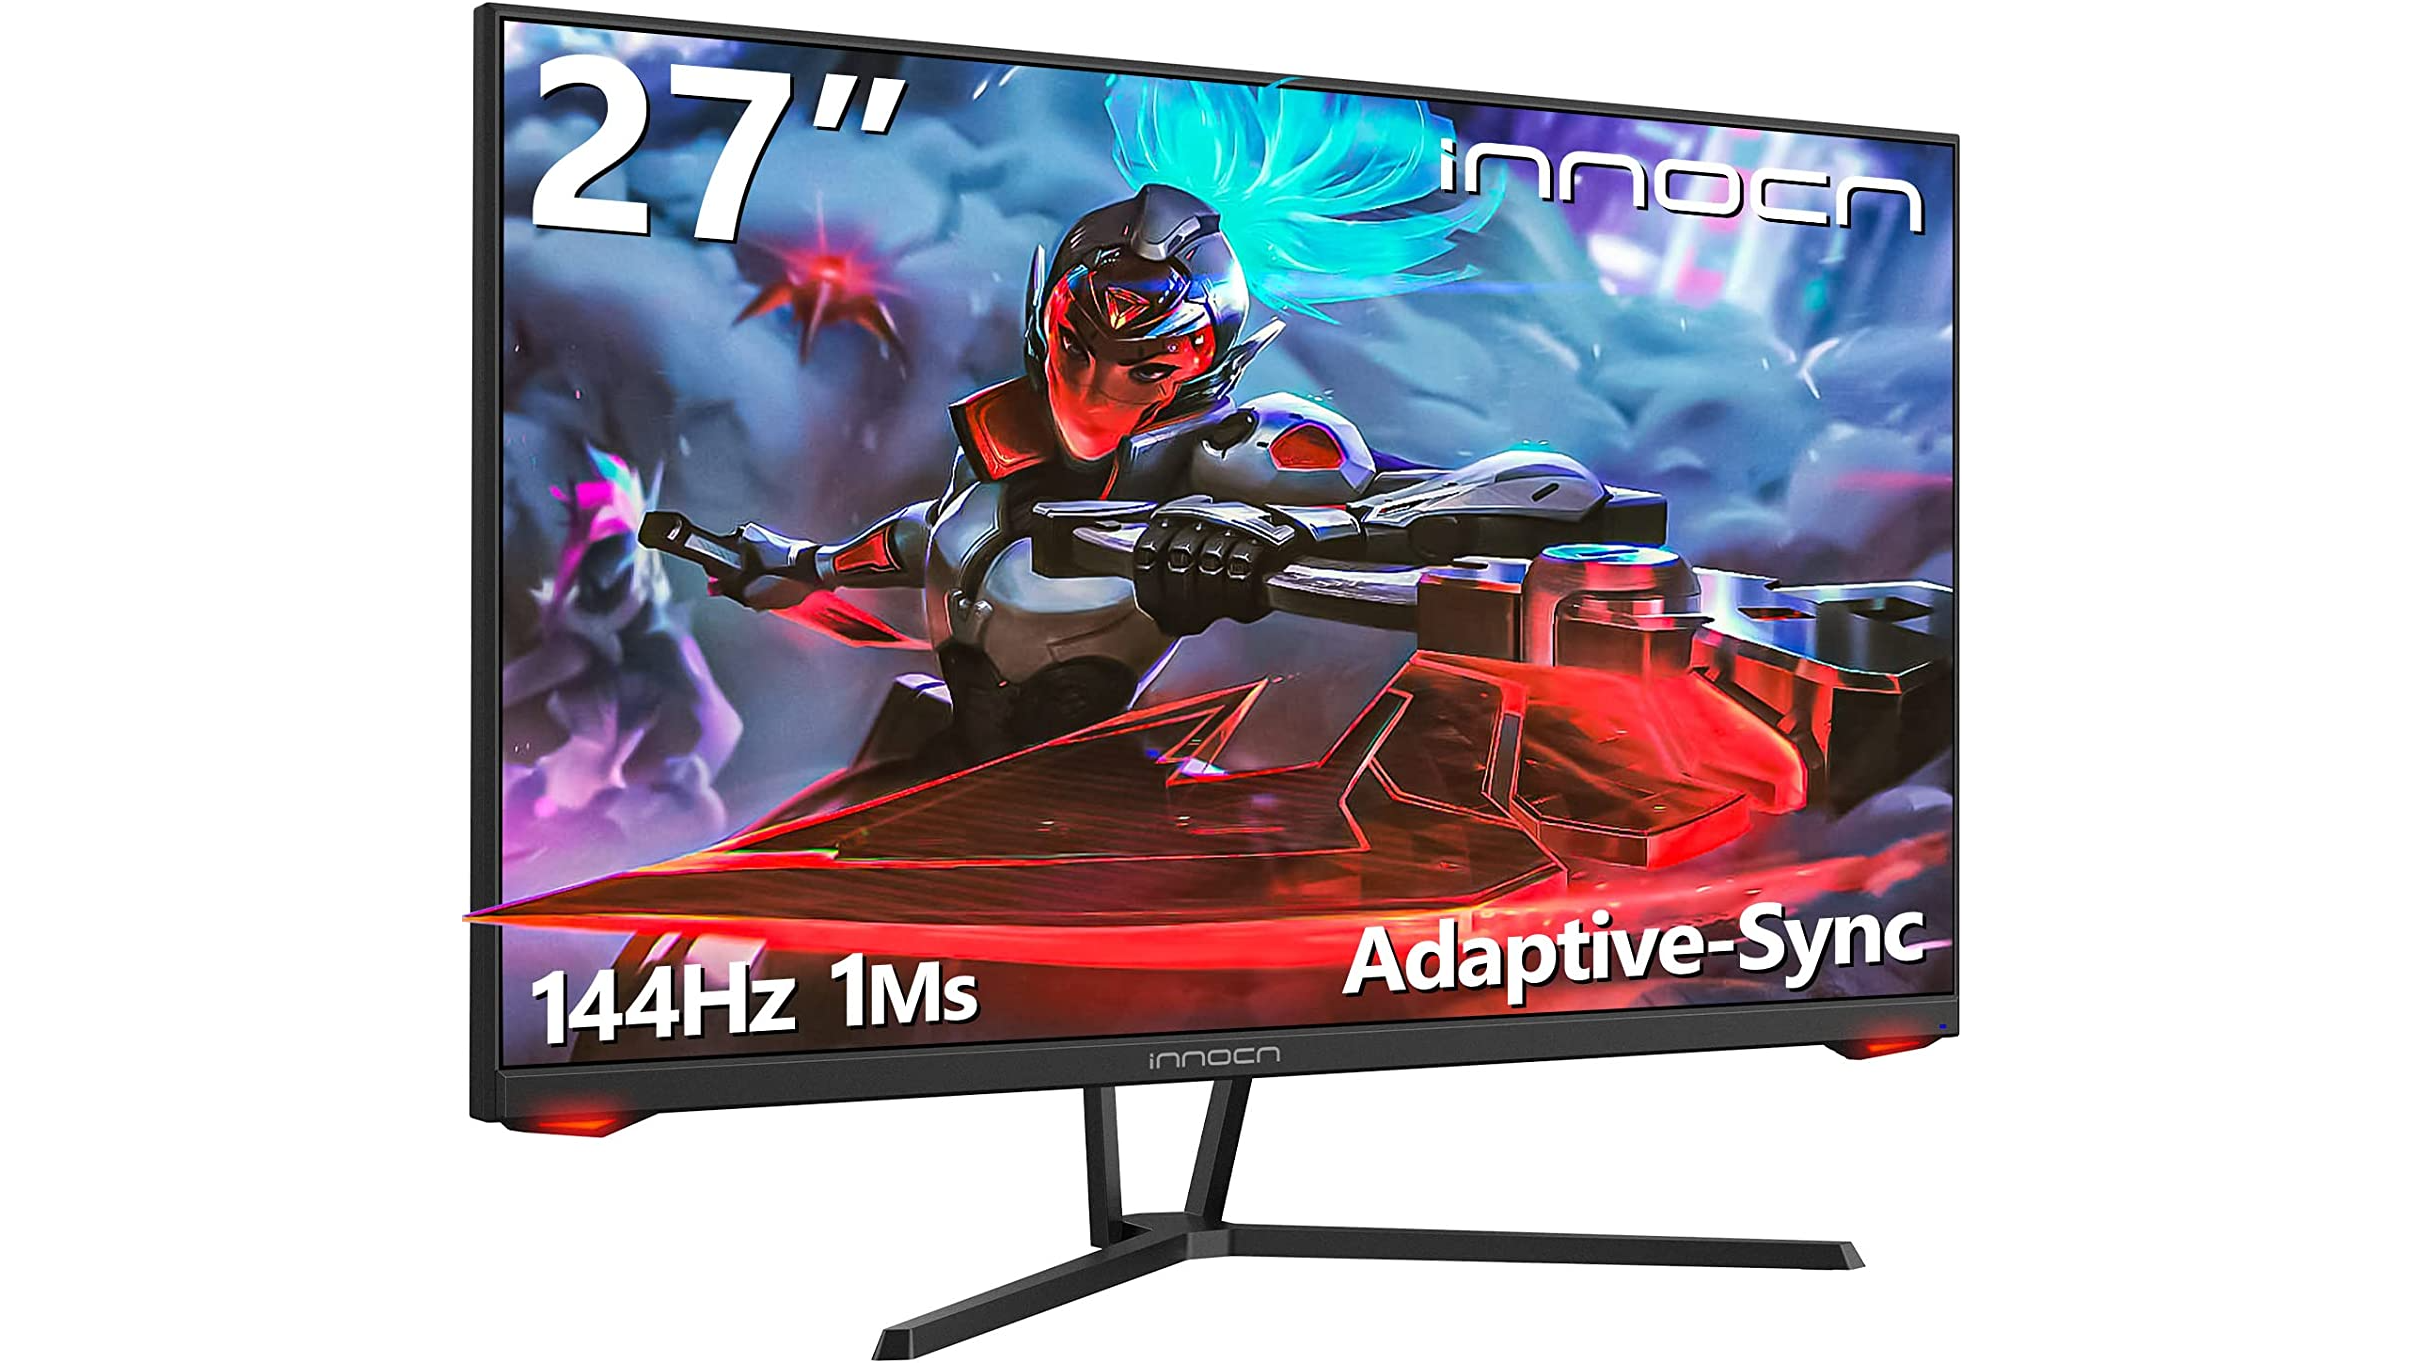 Image for Whoa, this 27-in 1440p 144Hz monitor is $180